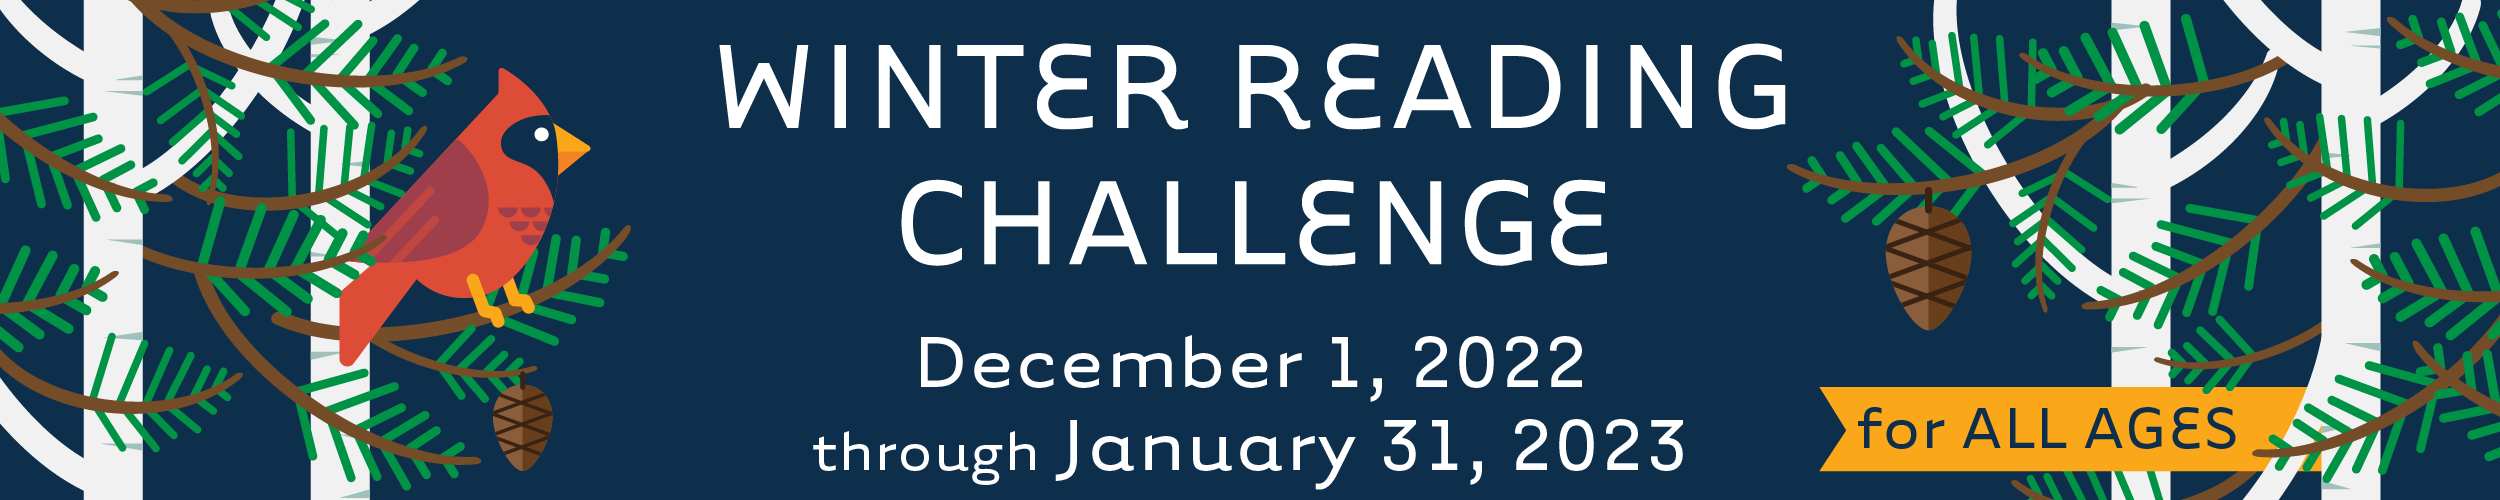 Winter Reading Challenge: December 1, 2022 through January 31, 2023. For All Ages.